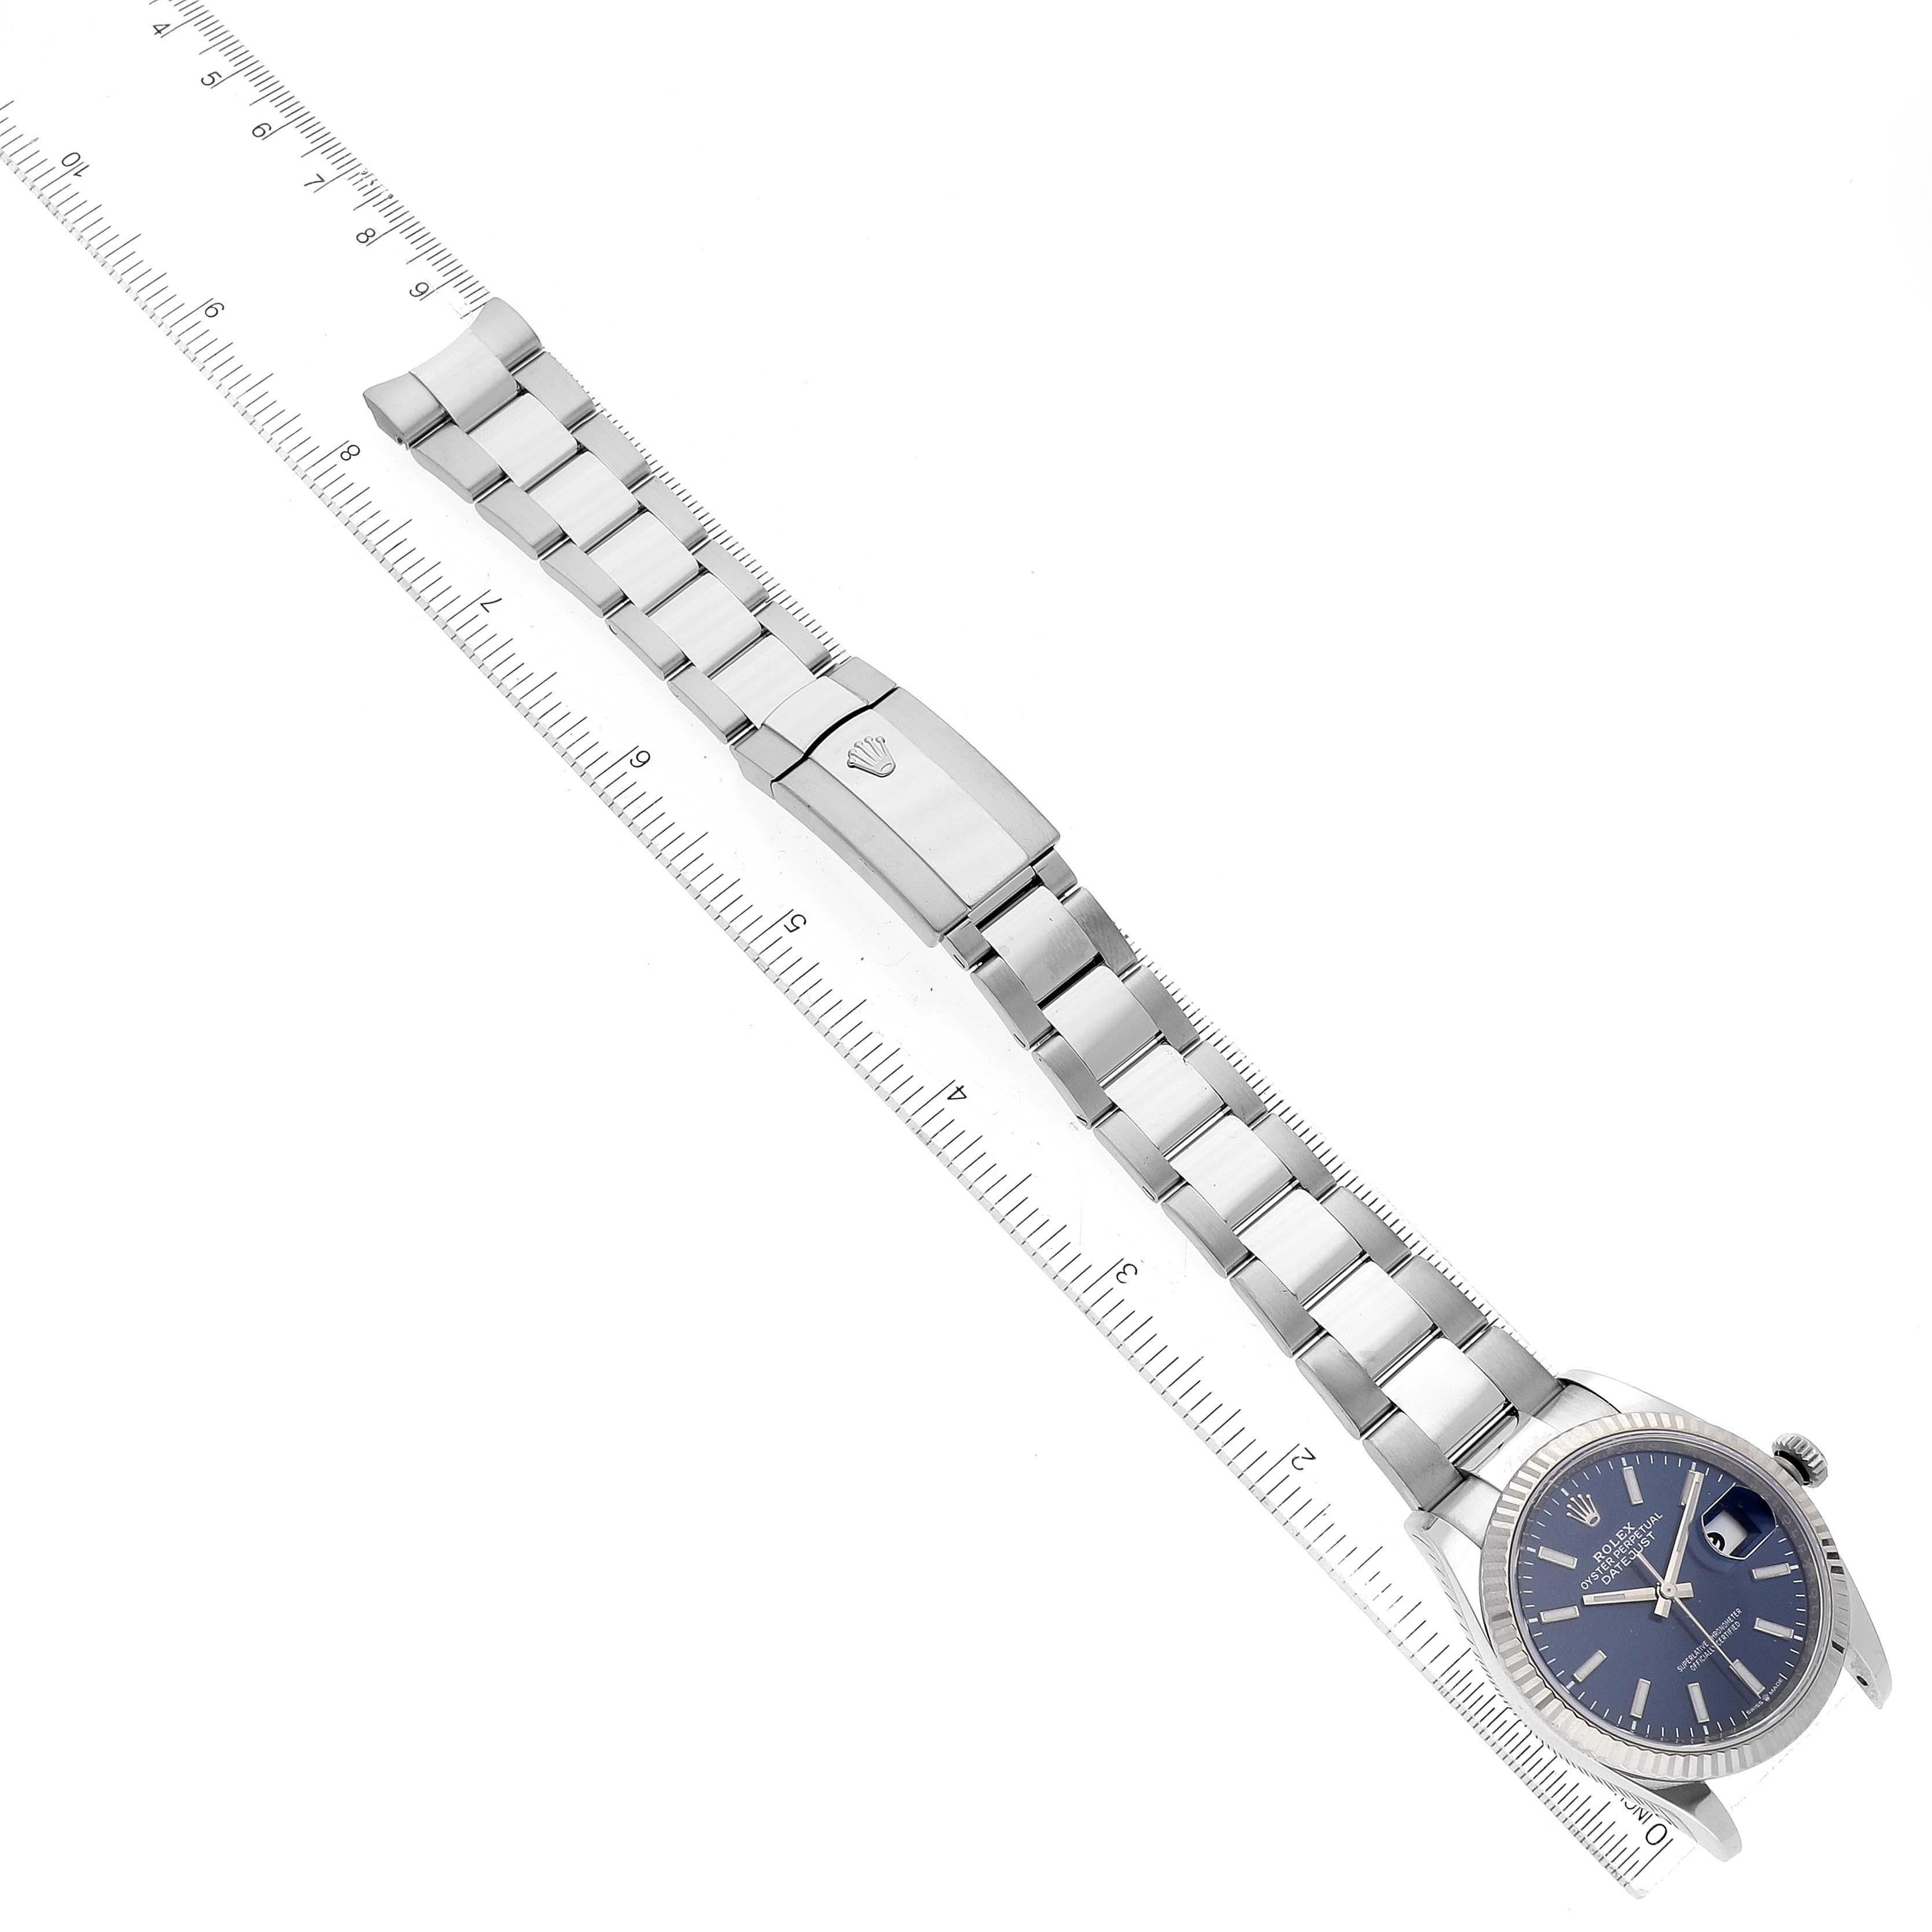 Rolex Datejust Steel White Gold Blue Dial Mens Watch 126234 Box Card For Sale 3